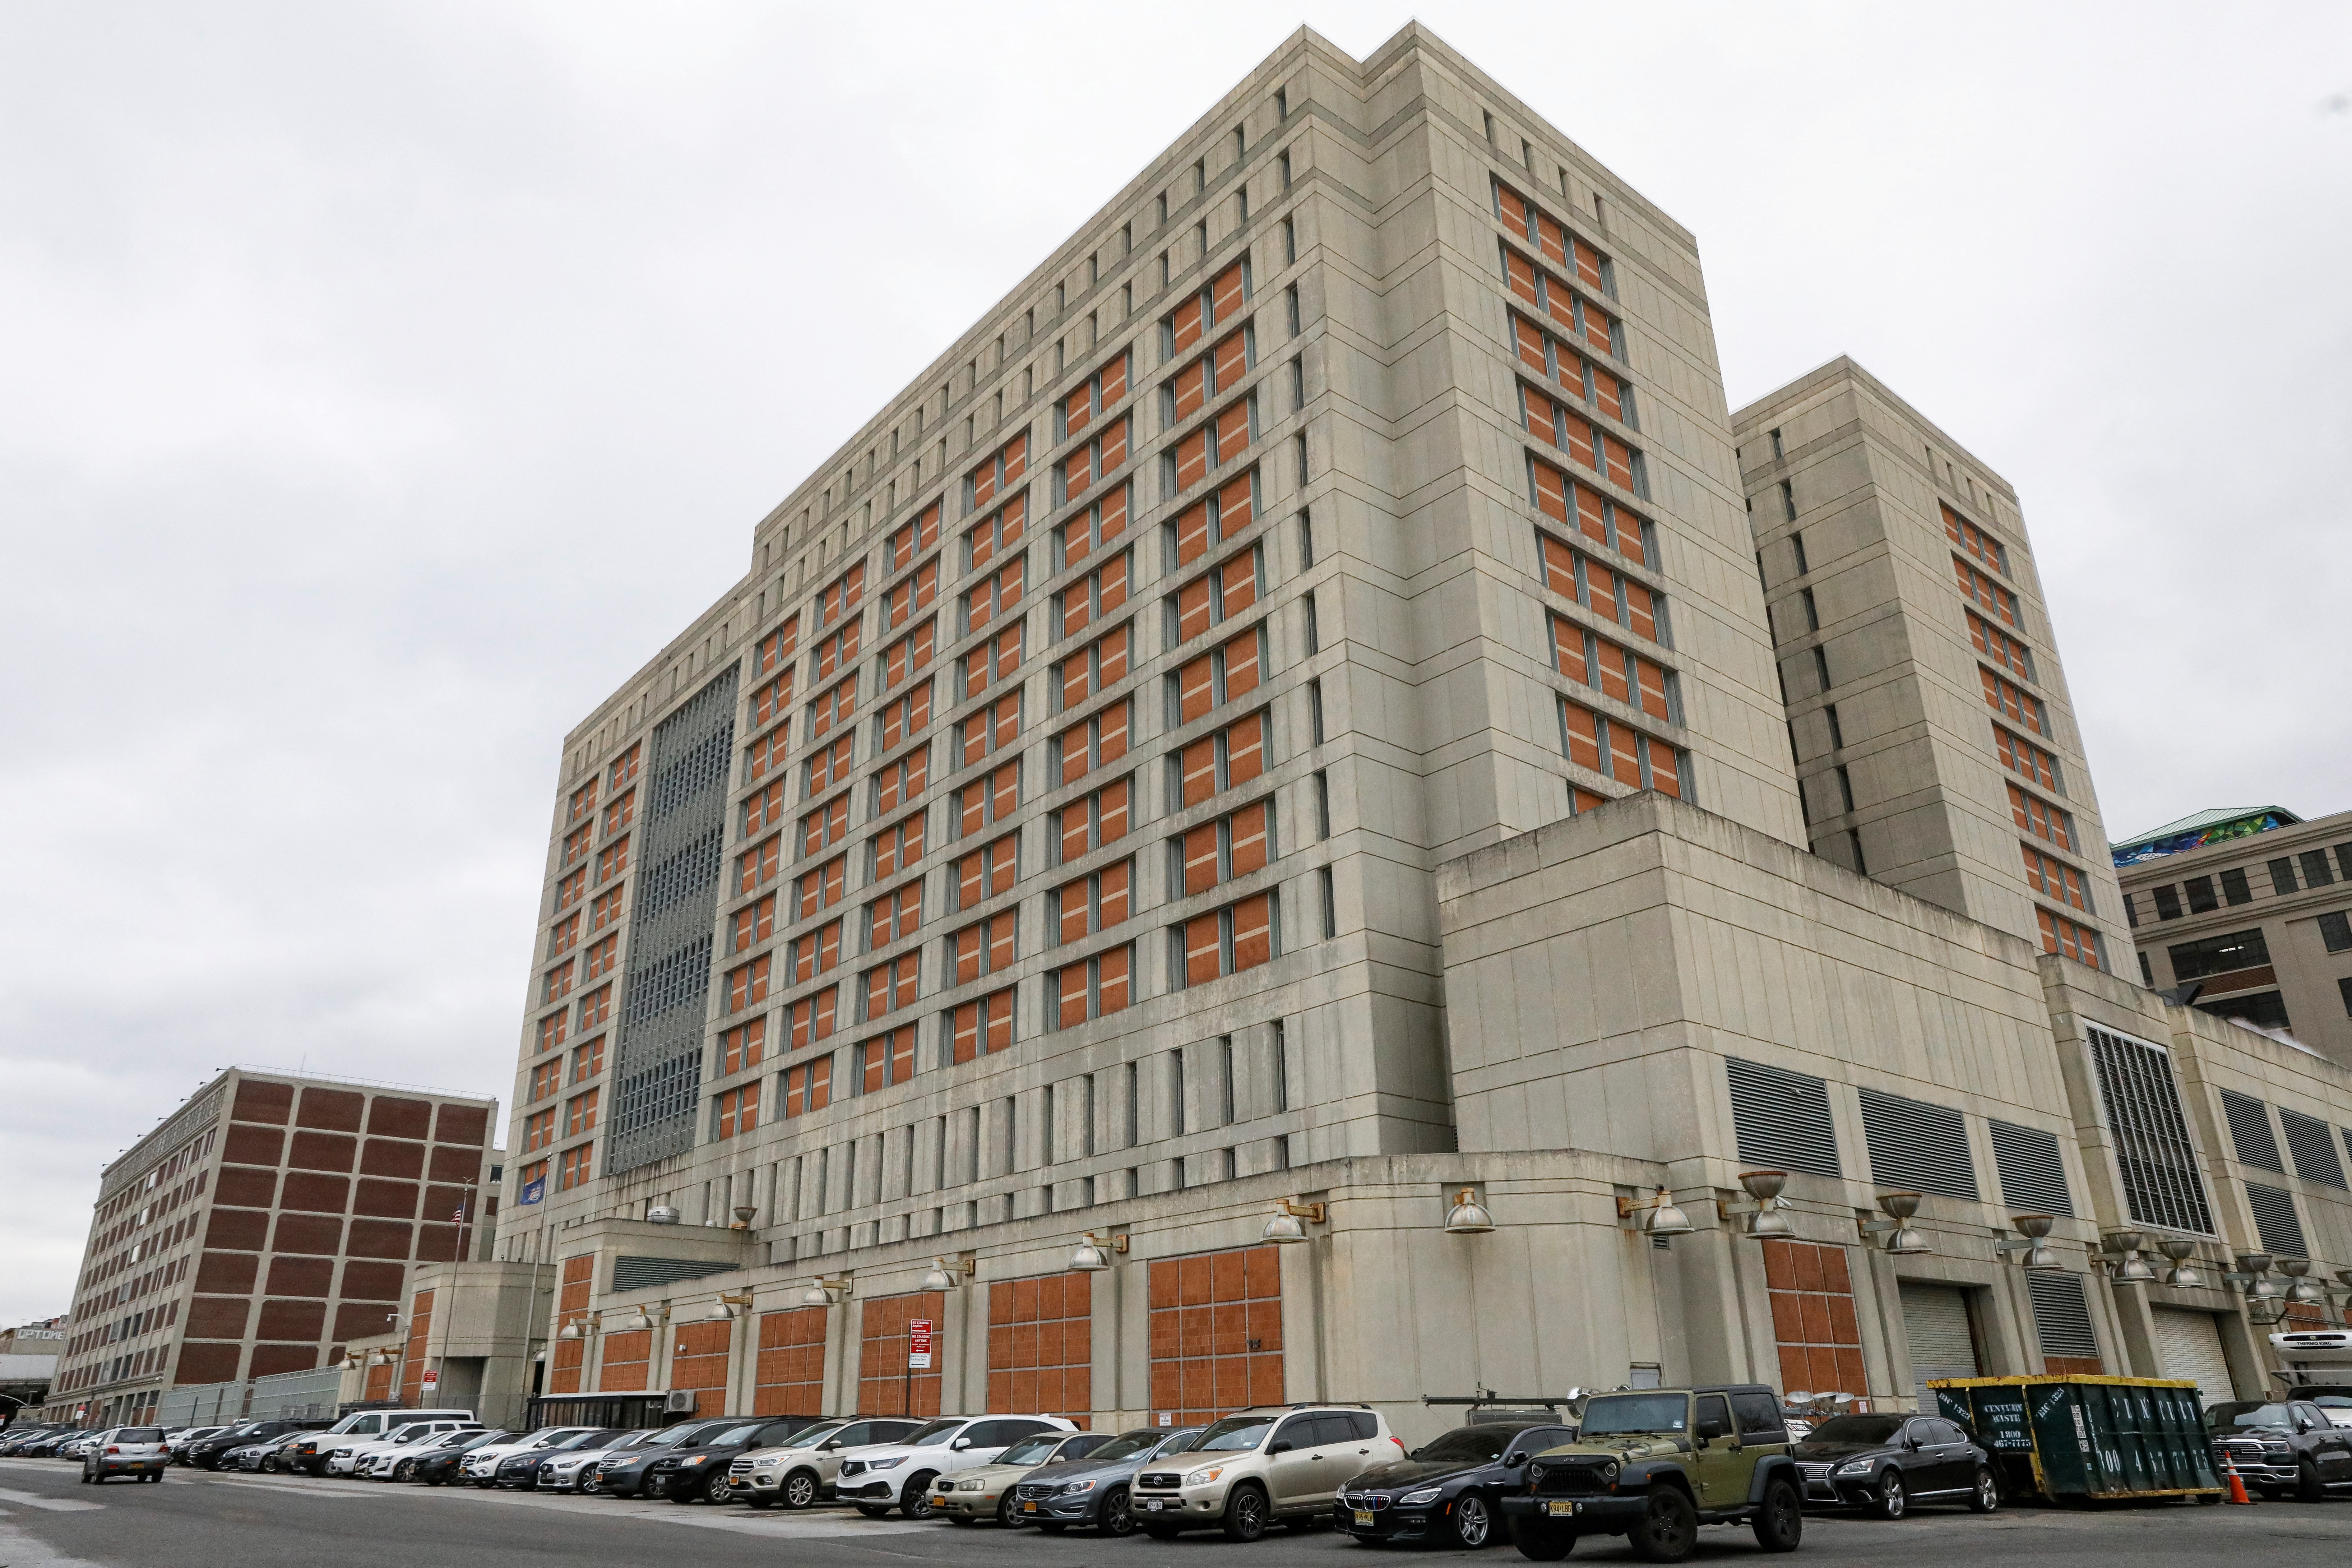 The Metropolitan Detention Center (MDC), which is operated by the U.S. Federal Bureau of Prisons, is pictured in Brooklyn, New York